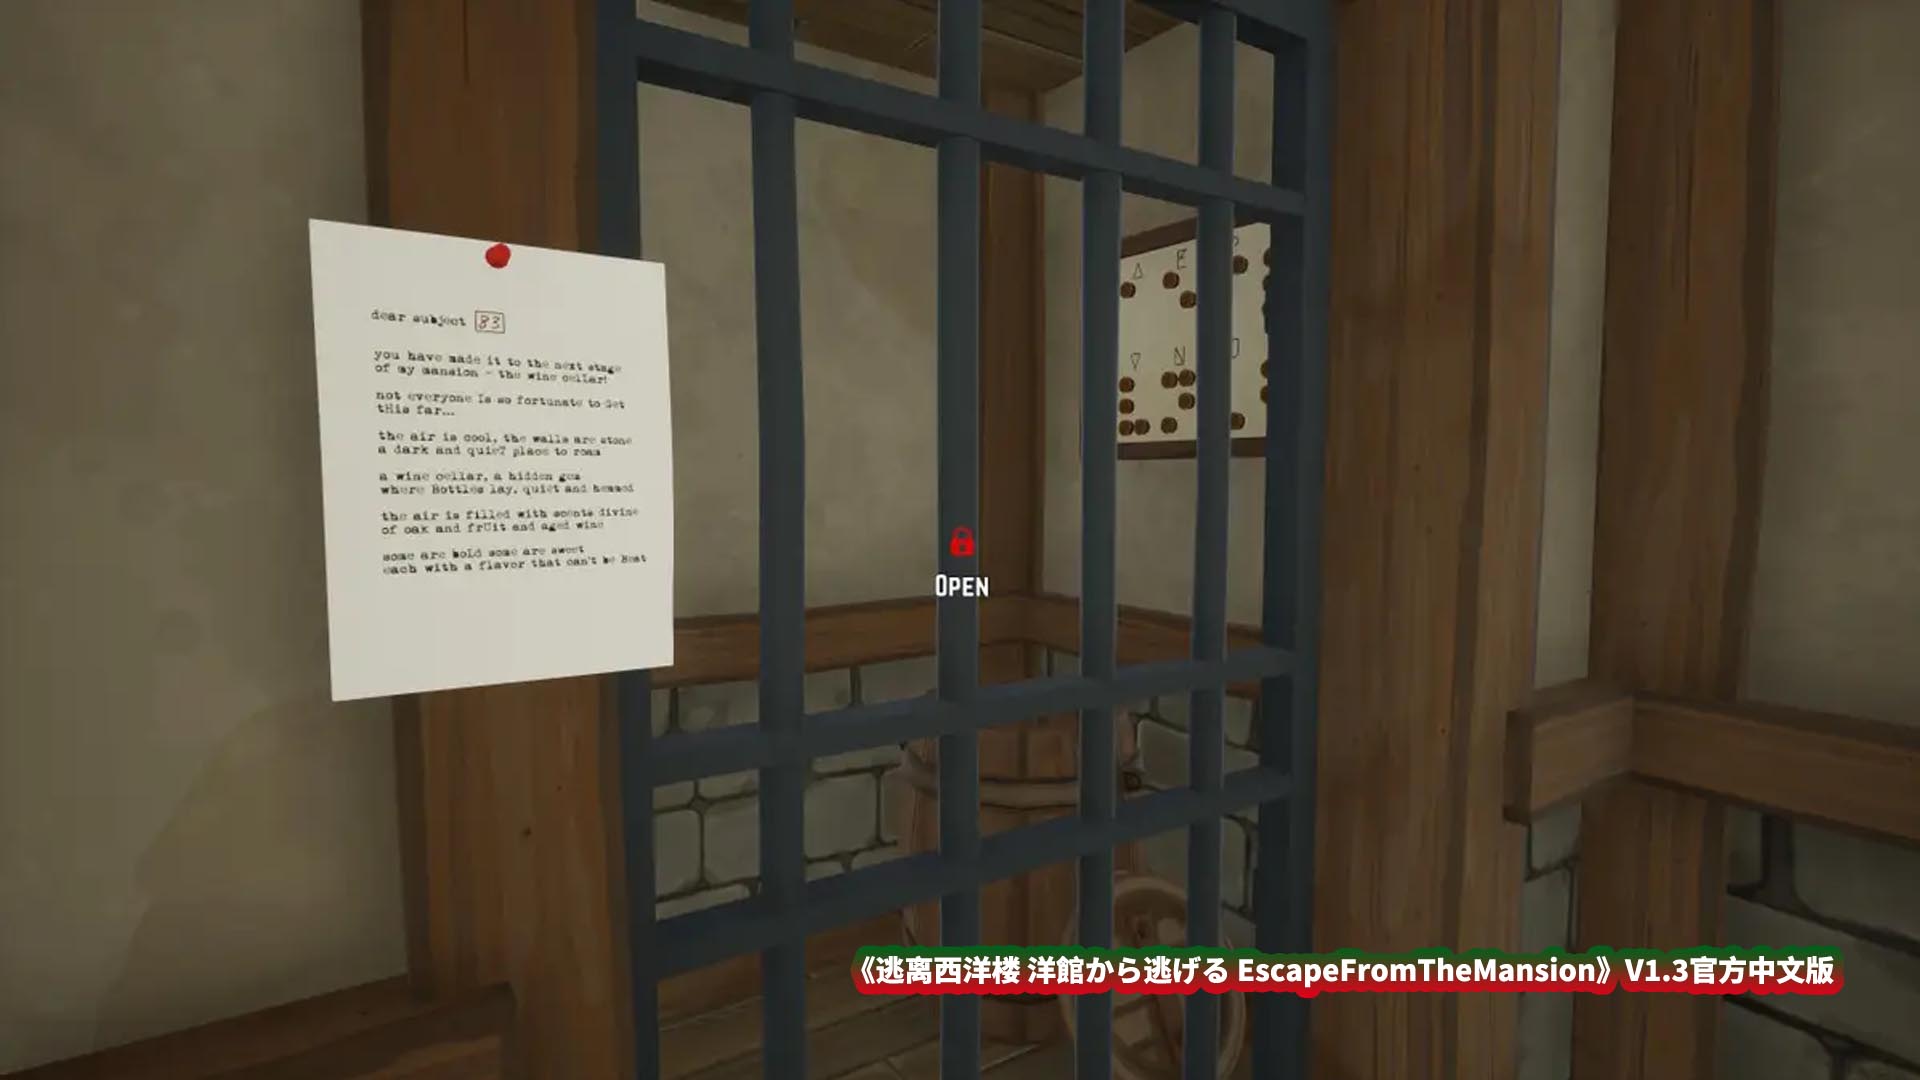 [3DFPS] 逃离西洋楼 洋館から逃げる EscapeFromTheMansion V1.3官方中文版 [度盘下载]